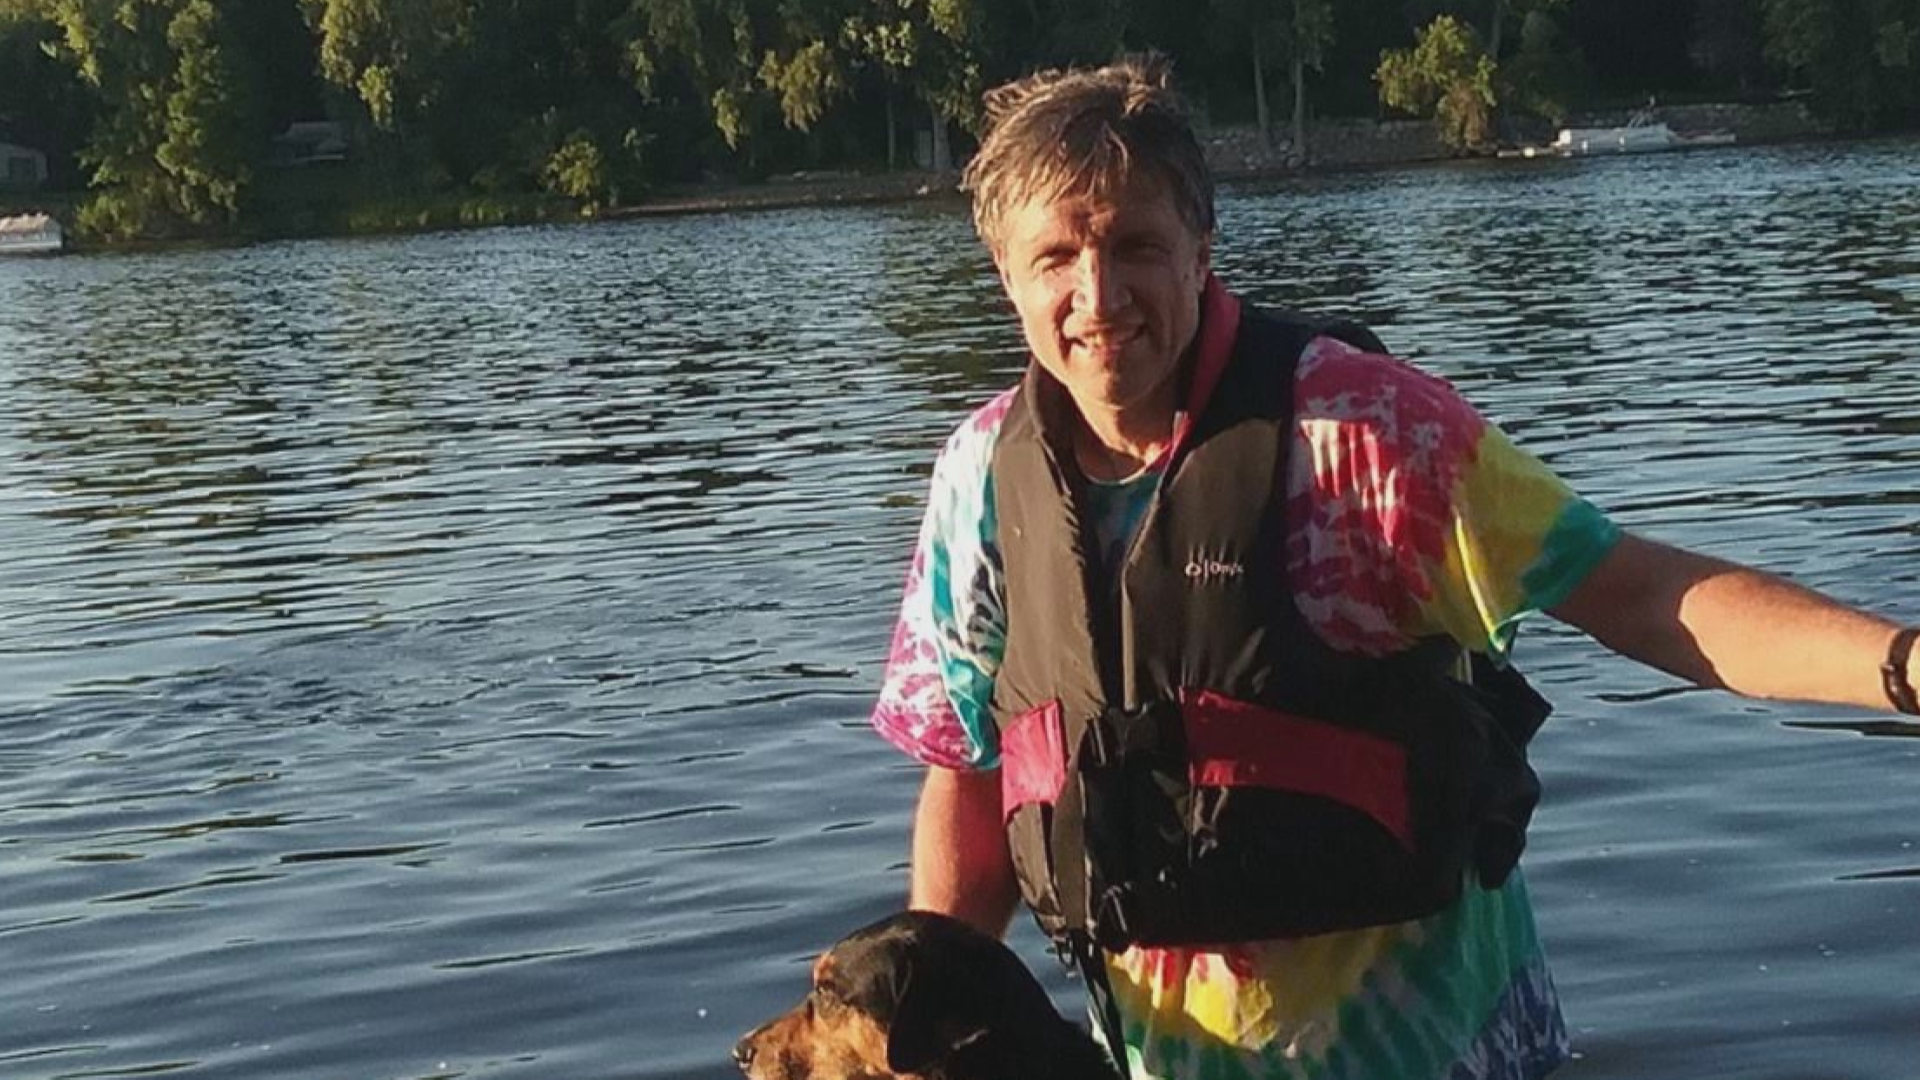 After David Schink disappeared while kayaking last year, his family developed a first-of-its-kind alert system that debuted in Florida this week.